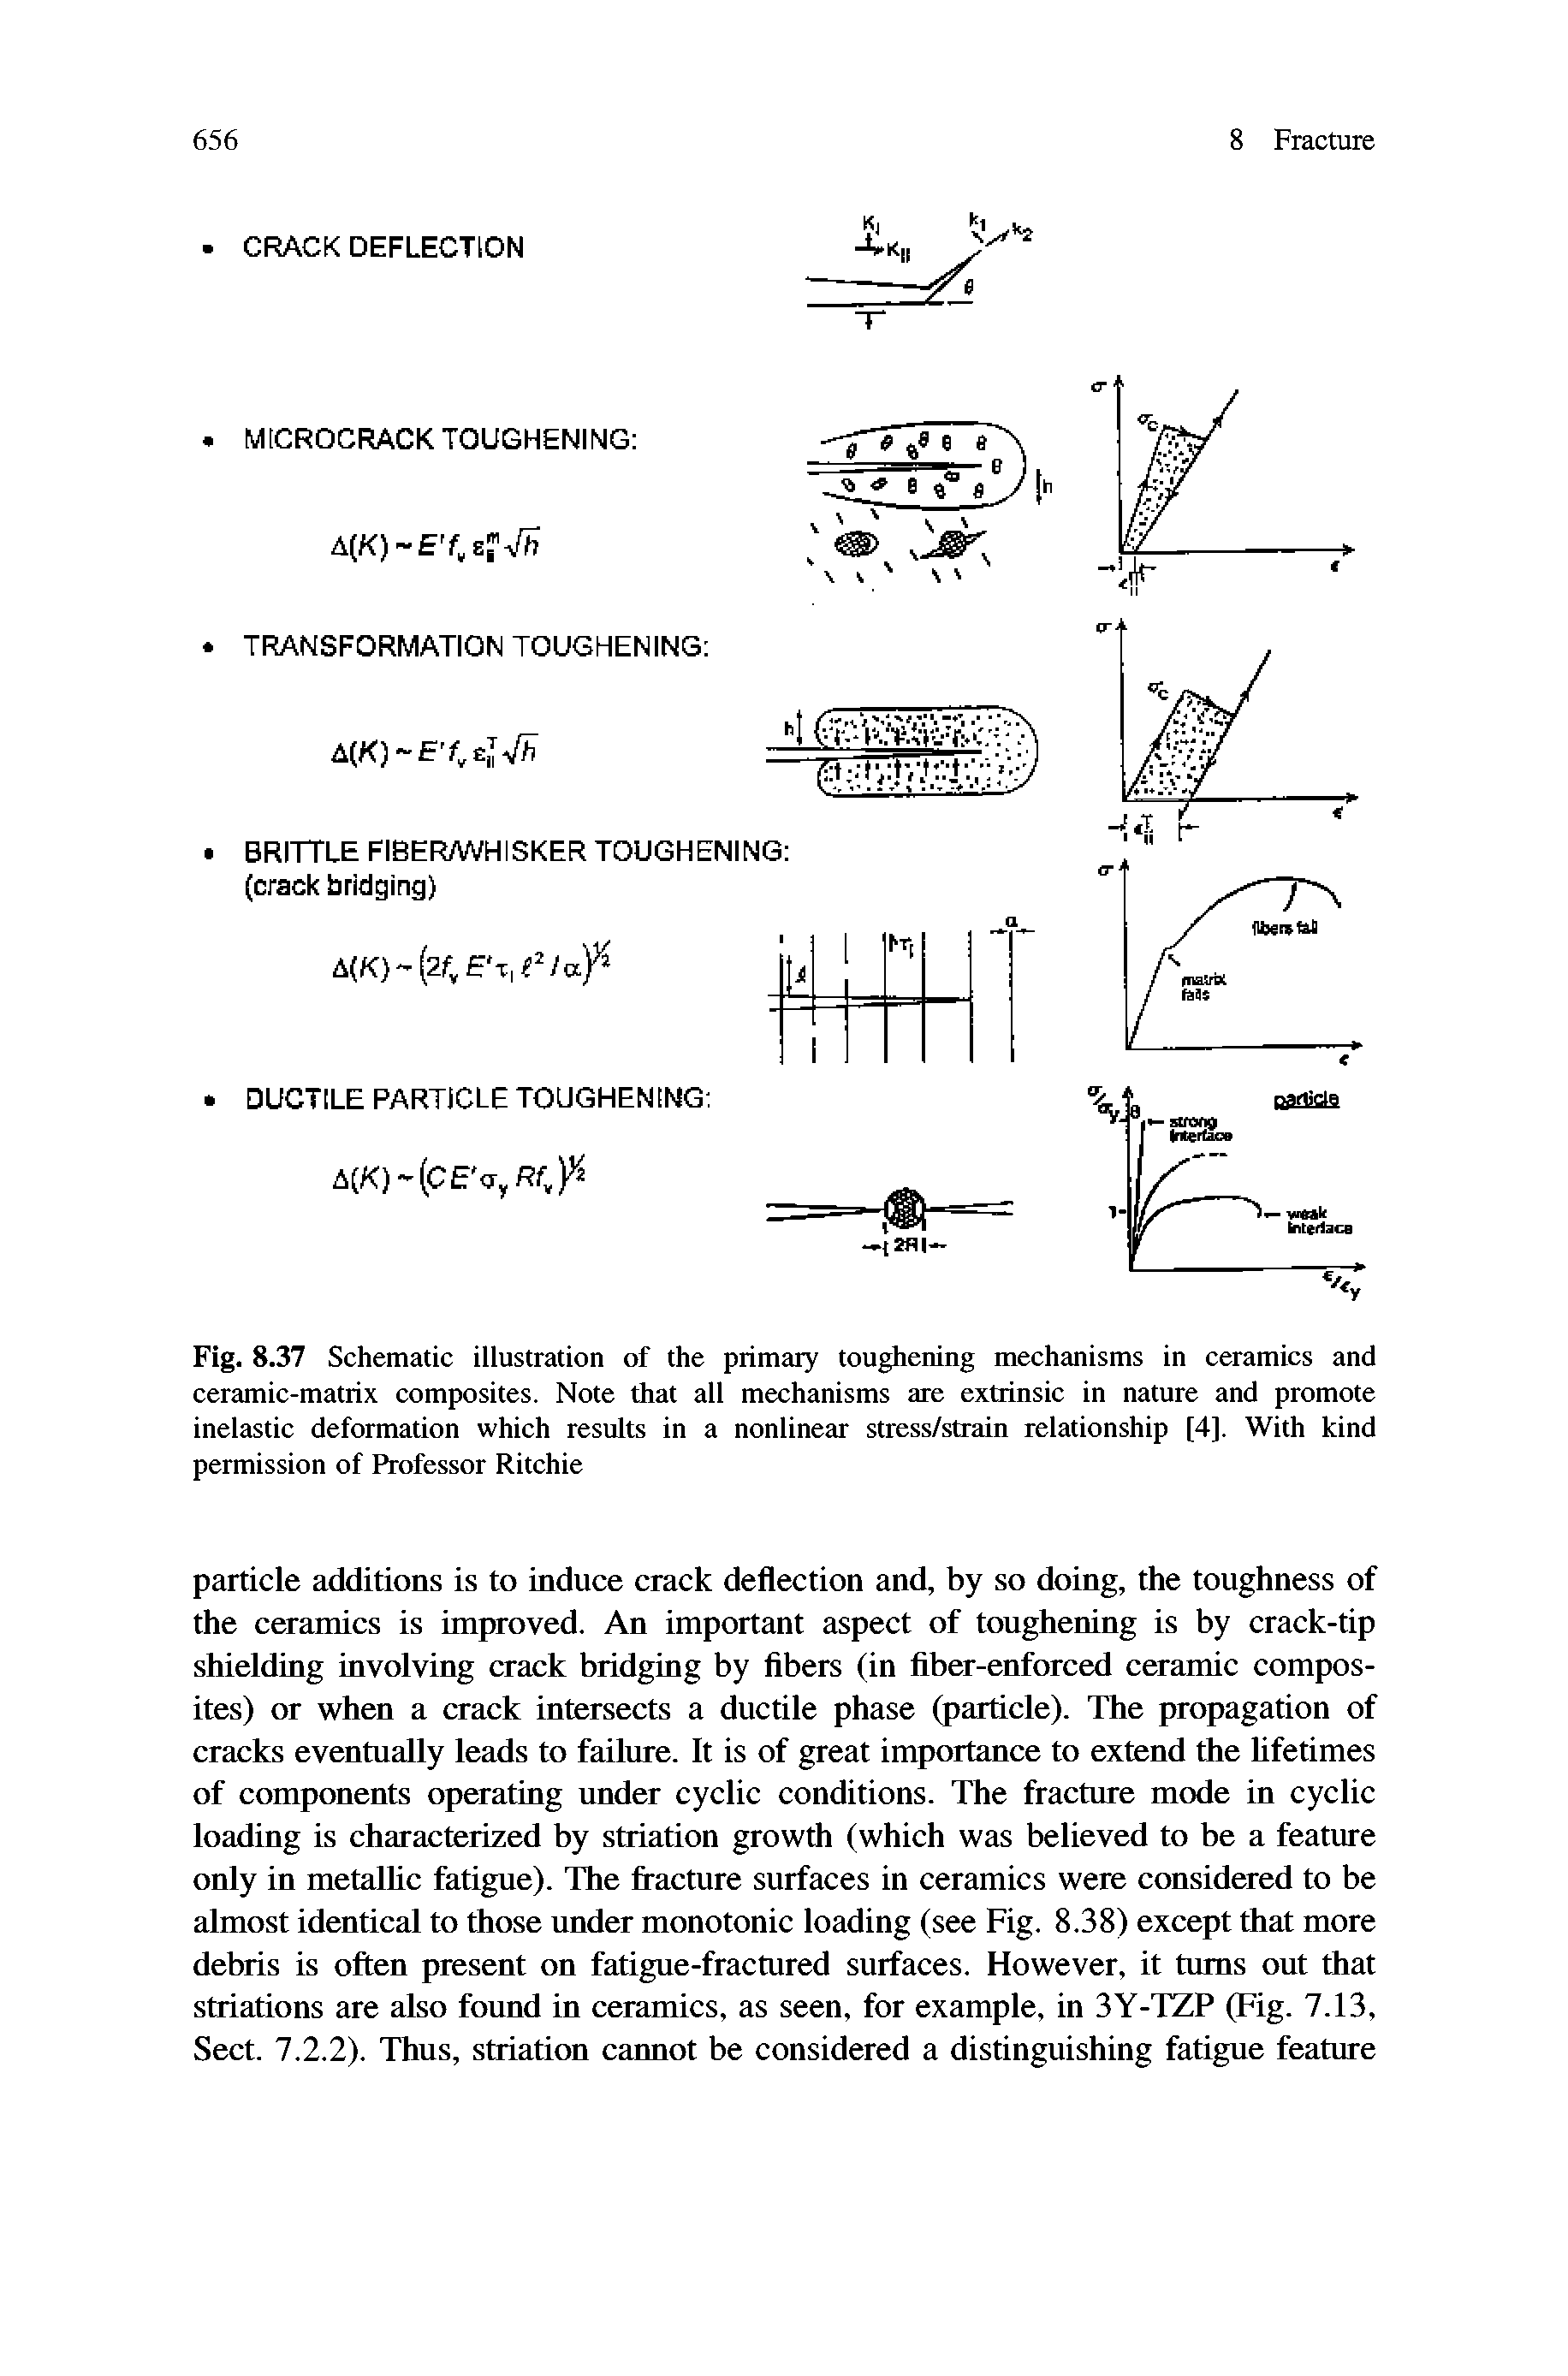 Fig. 8.37 Schematic illustration of the primary toughening mechanisms in ceramics and ceramic-matrix composites. Note that all mechanisms are extrinsic in nature and promote inelastic deformation which results in a nonlinear stress/strain relationship [4]. With kind permission of Professor Ritchie...